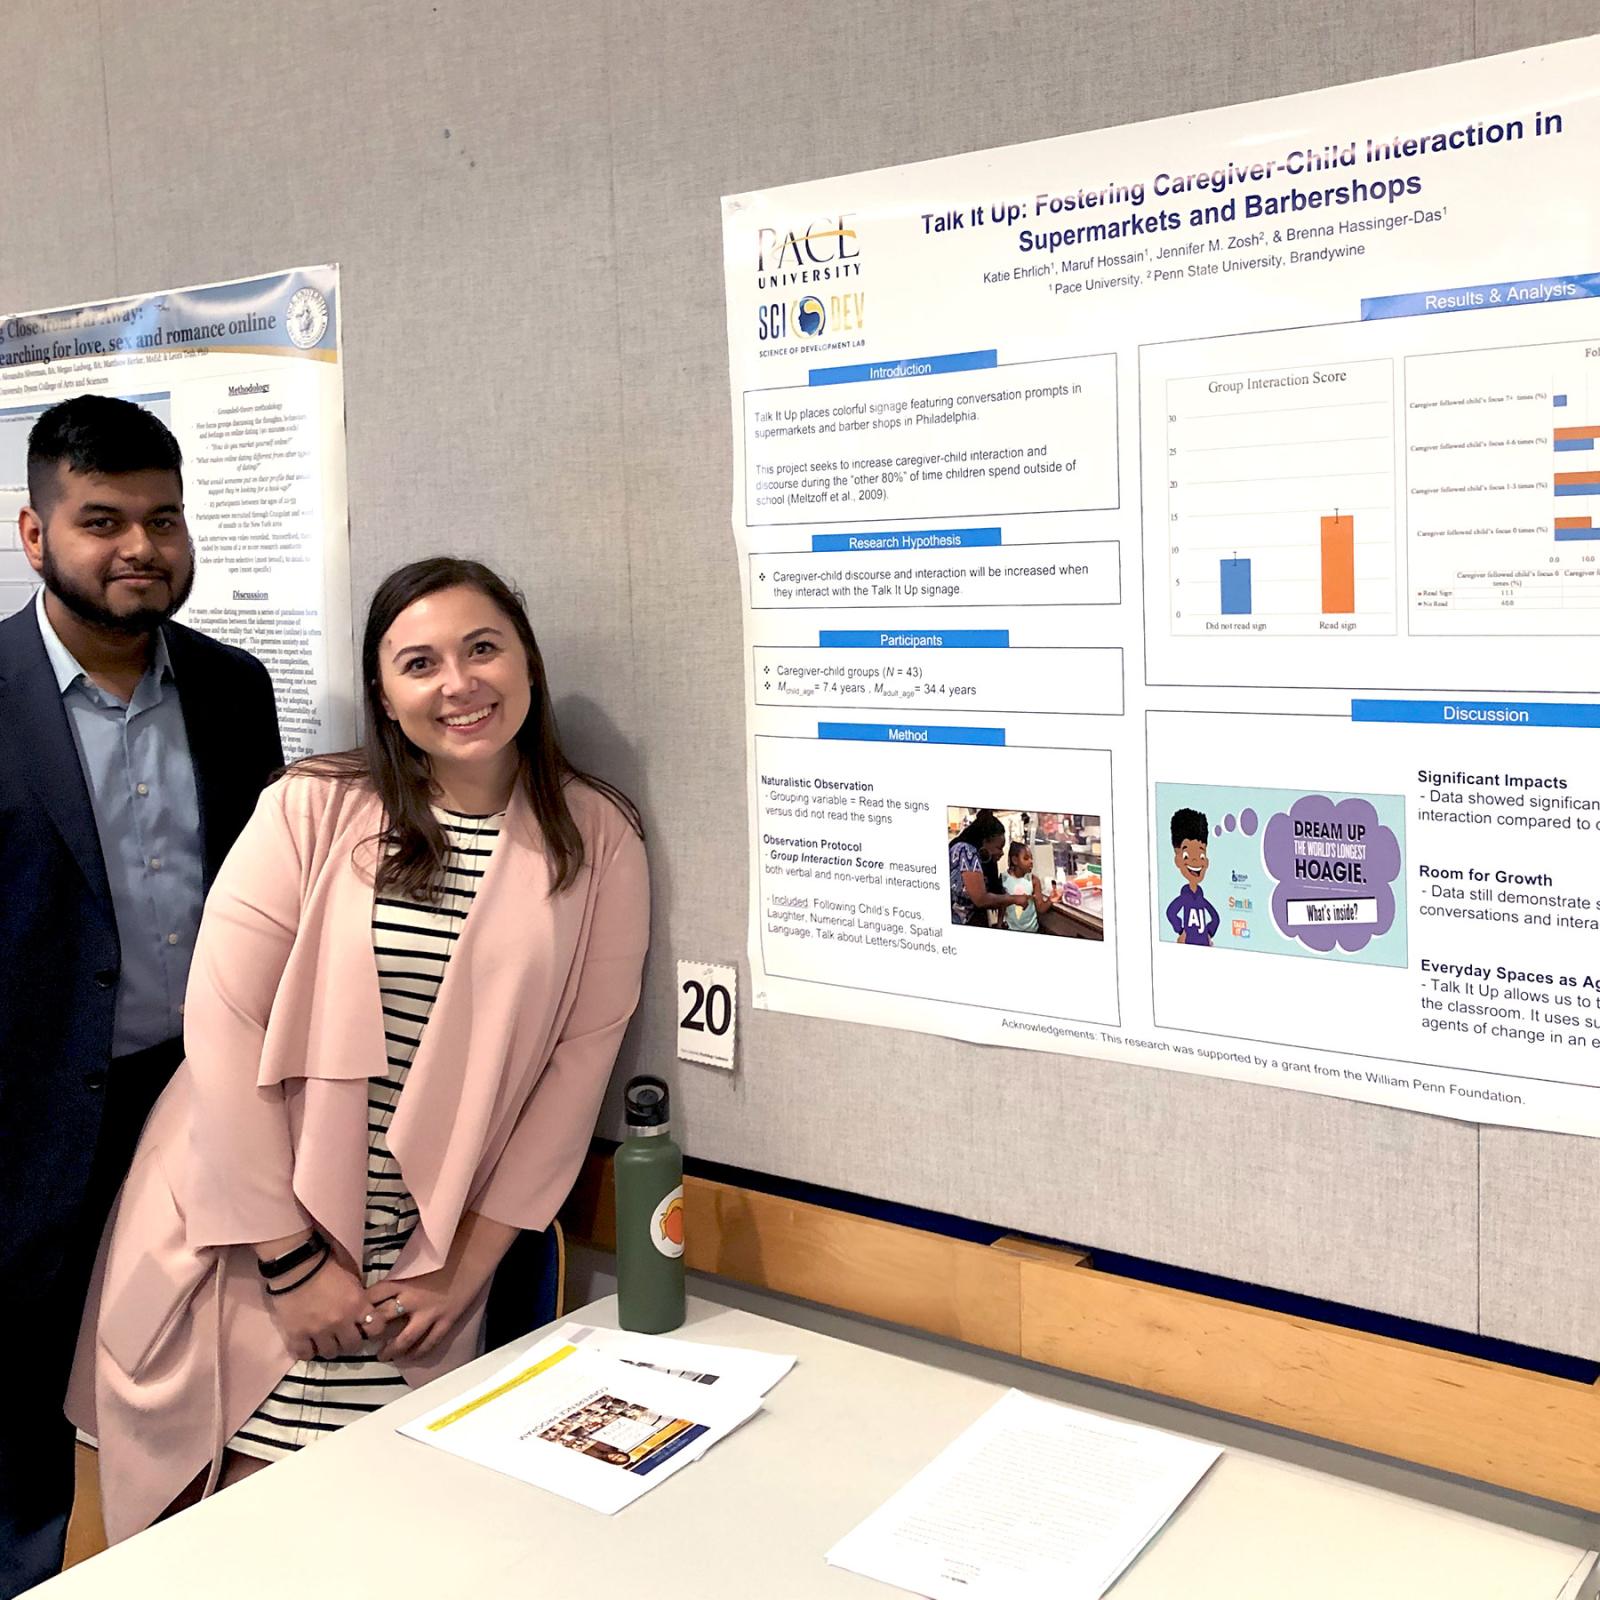 Two Pace University Psychology NYC students present research on a poster for a Psychology conference